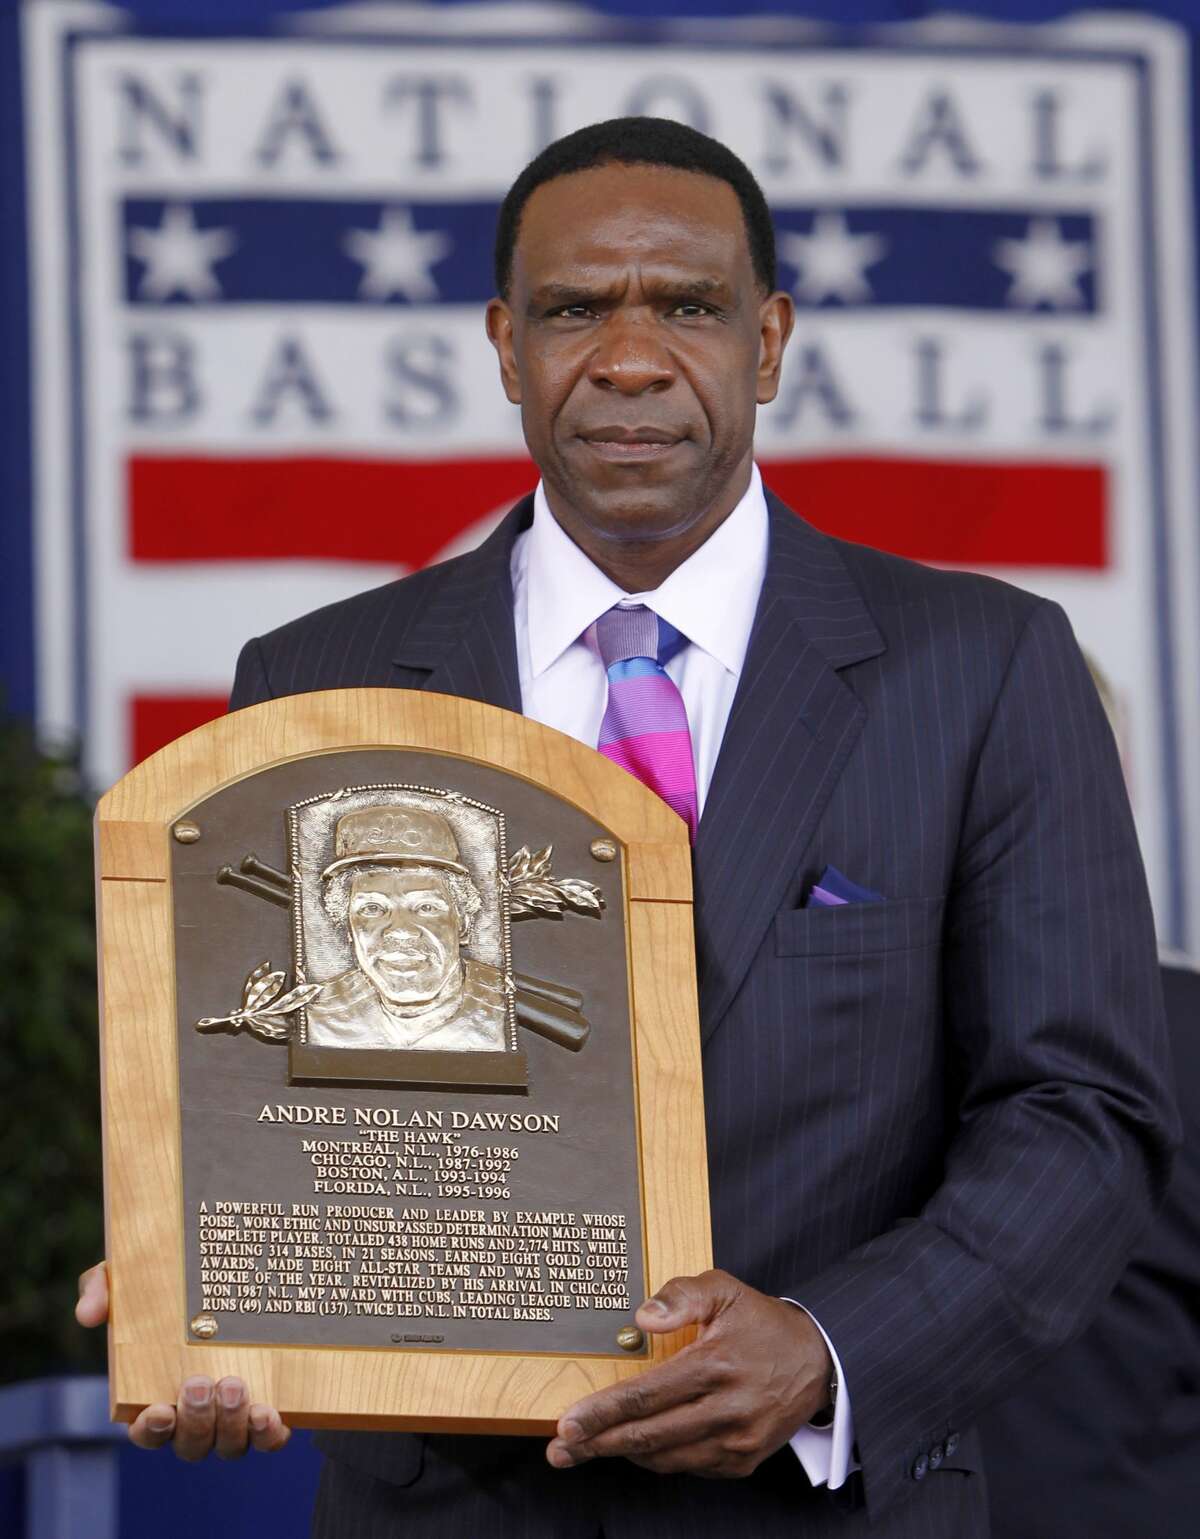 Andre Dawson poses with his plaque after his induction to the Baseball Hall of Fame in Cooperstown, N.Y., on Sunday, July 25, 2010. (AP Photo/Mike Groll)